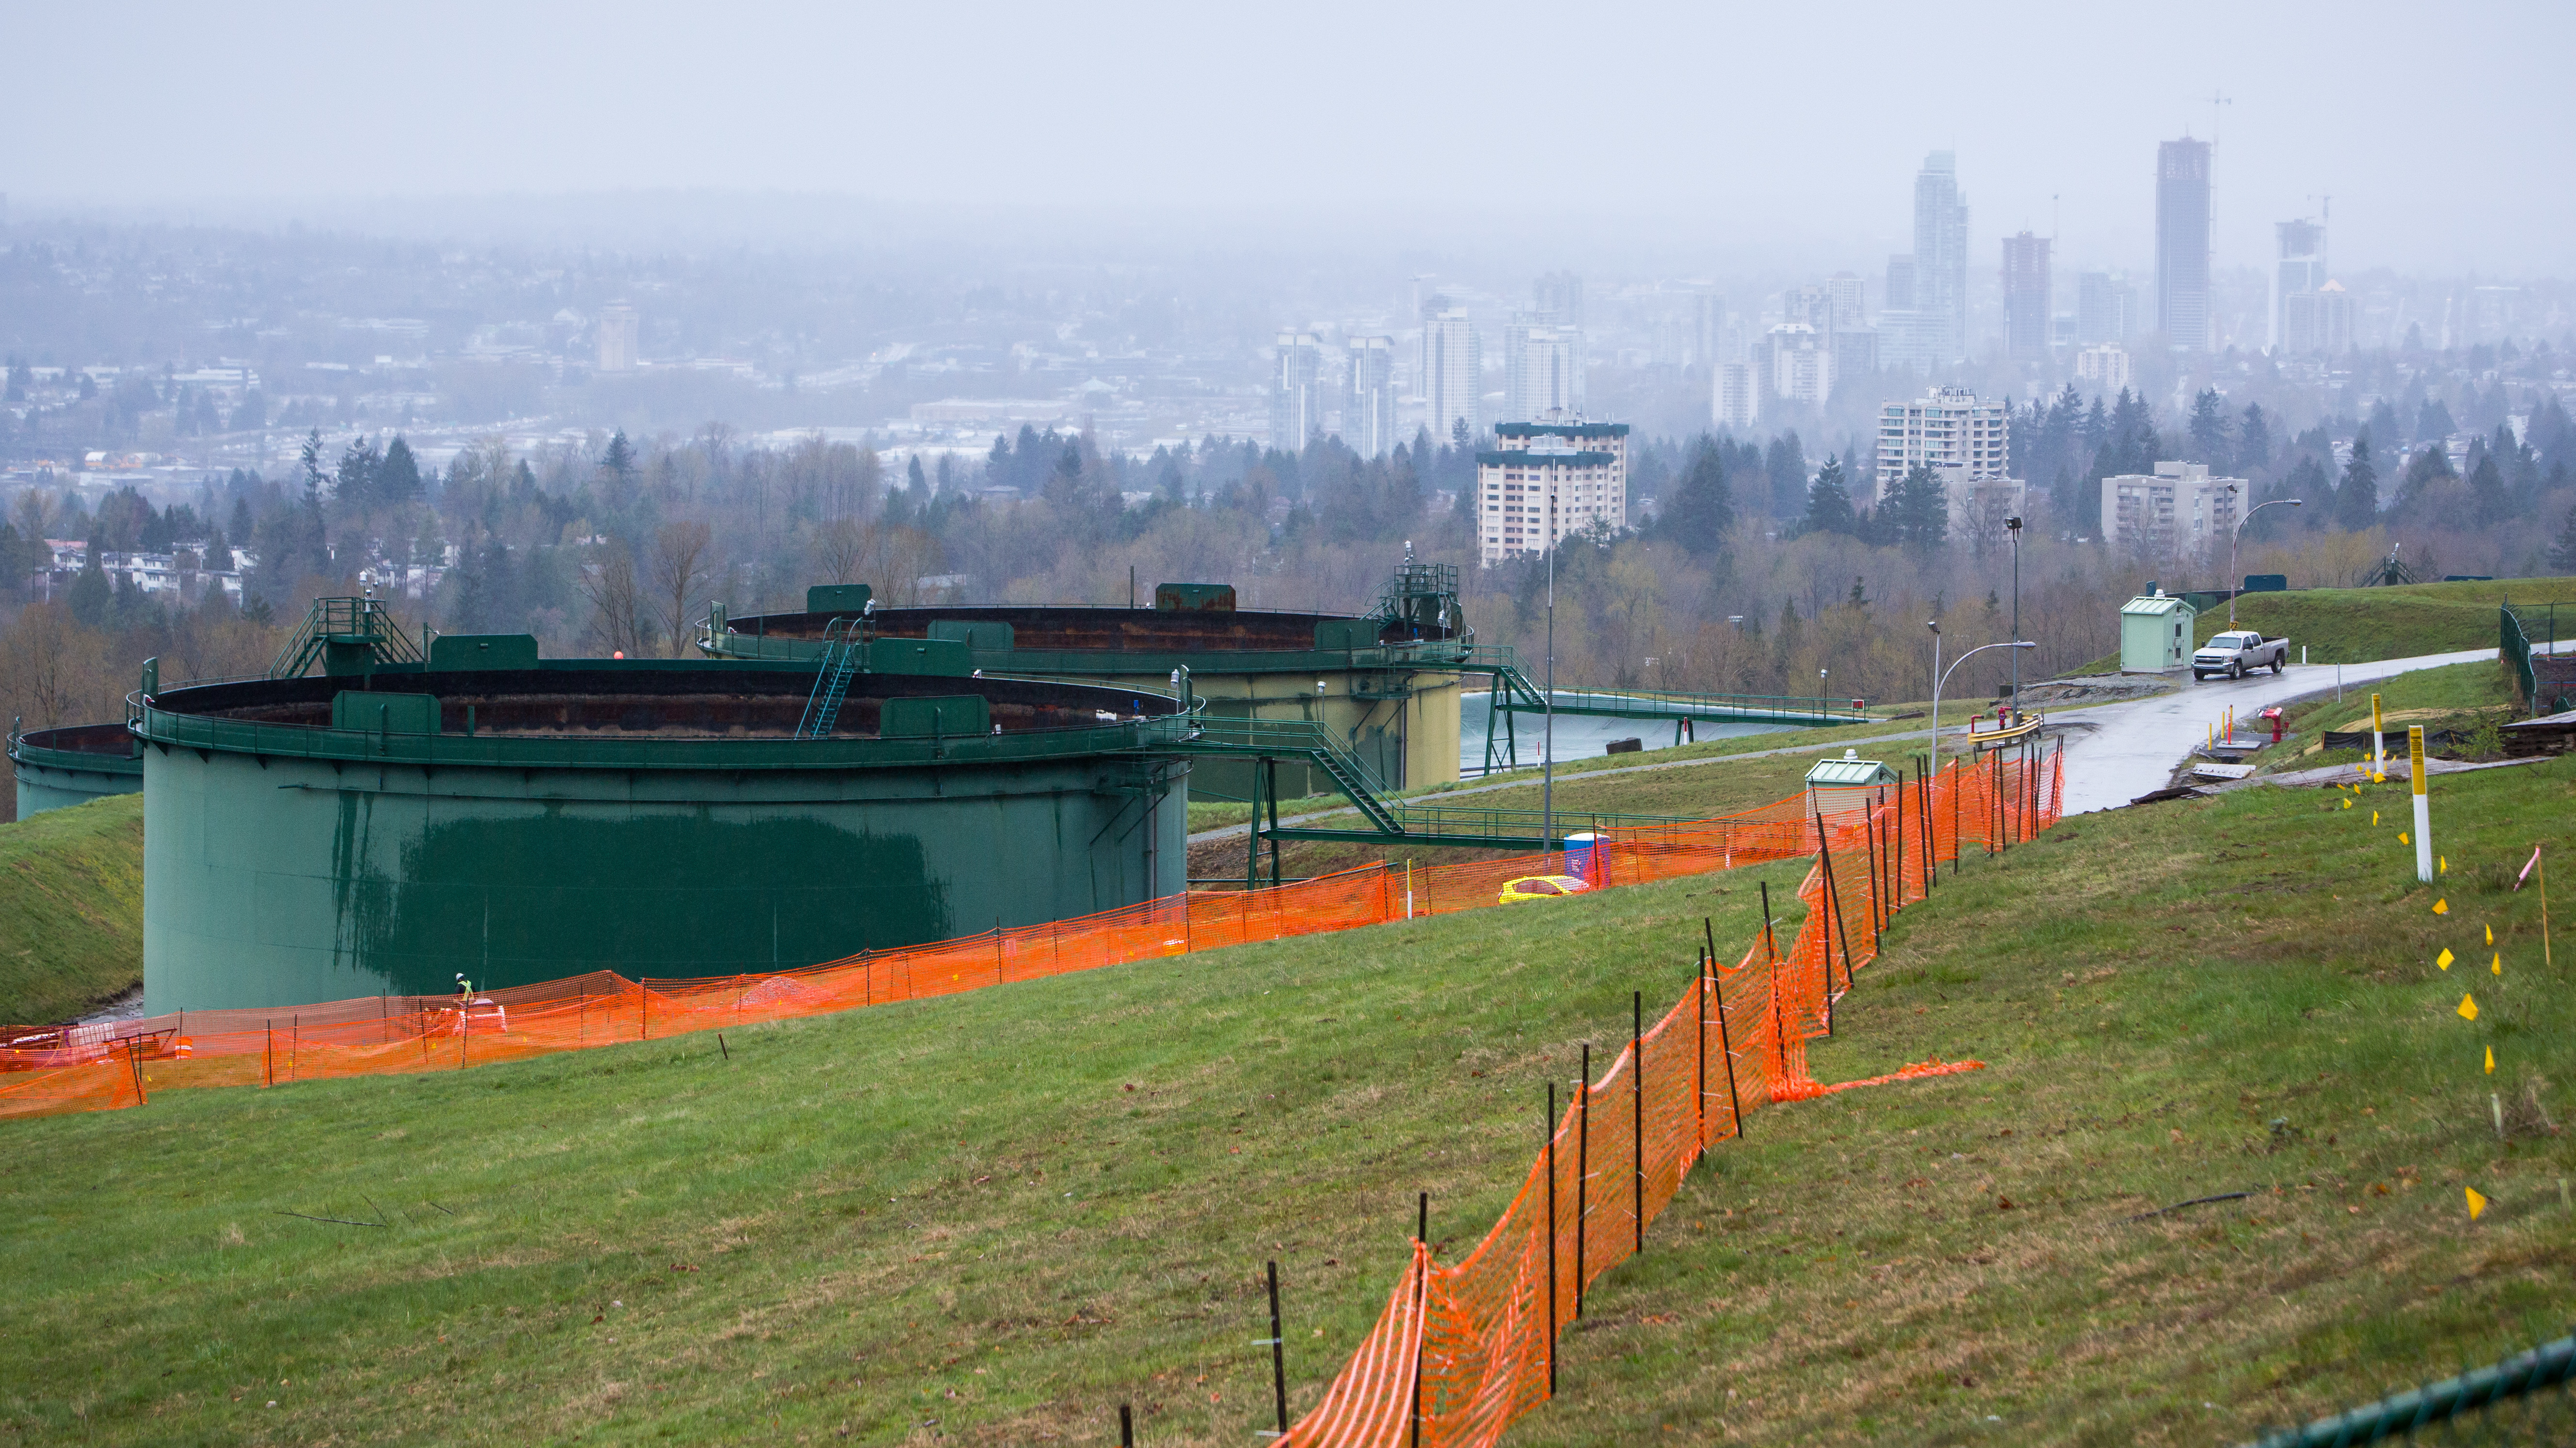 The Canadian government is buying a pipeline expansion project in an effort to eliminate further derailment from protests and delays. Here, oil tanks stand near the Trans Mountain pipeline expansion site in Burnaby, British Columbia, in April. (Photo by Bloomberg via Getty Images)